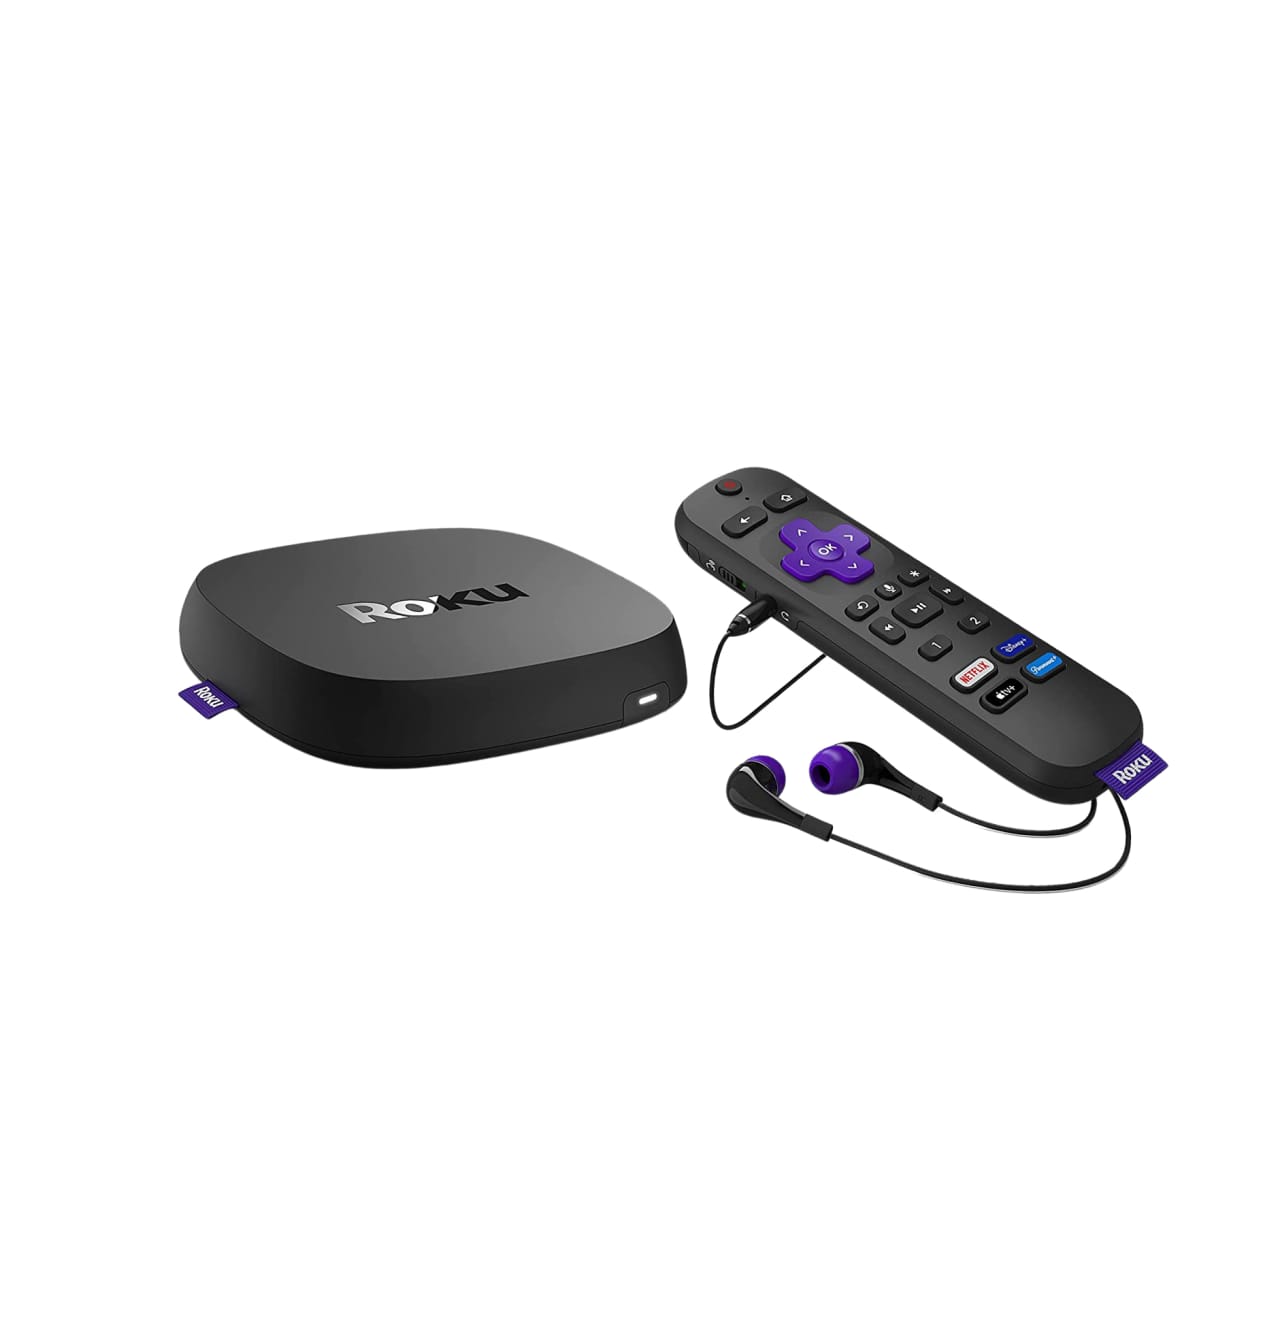 4 Improvements I Want to See in a New Roku Streaming Stick - CNET